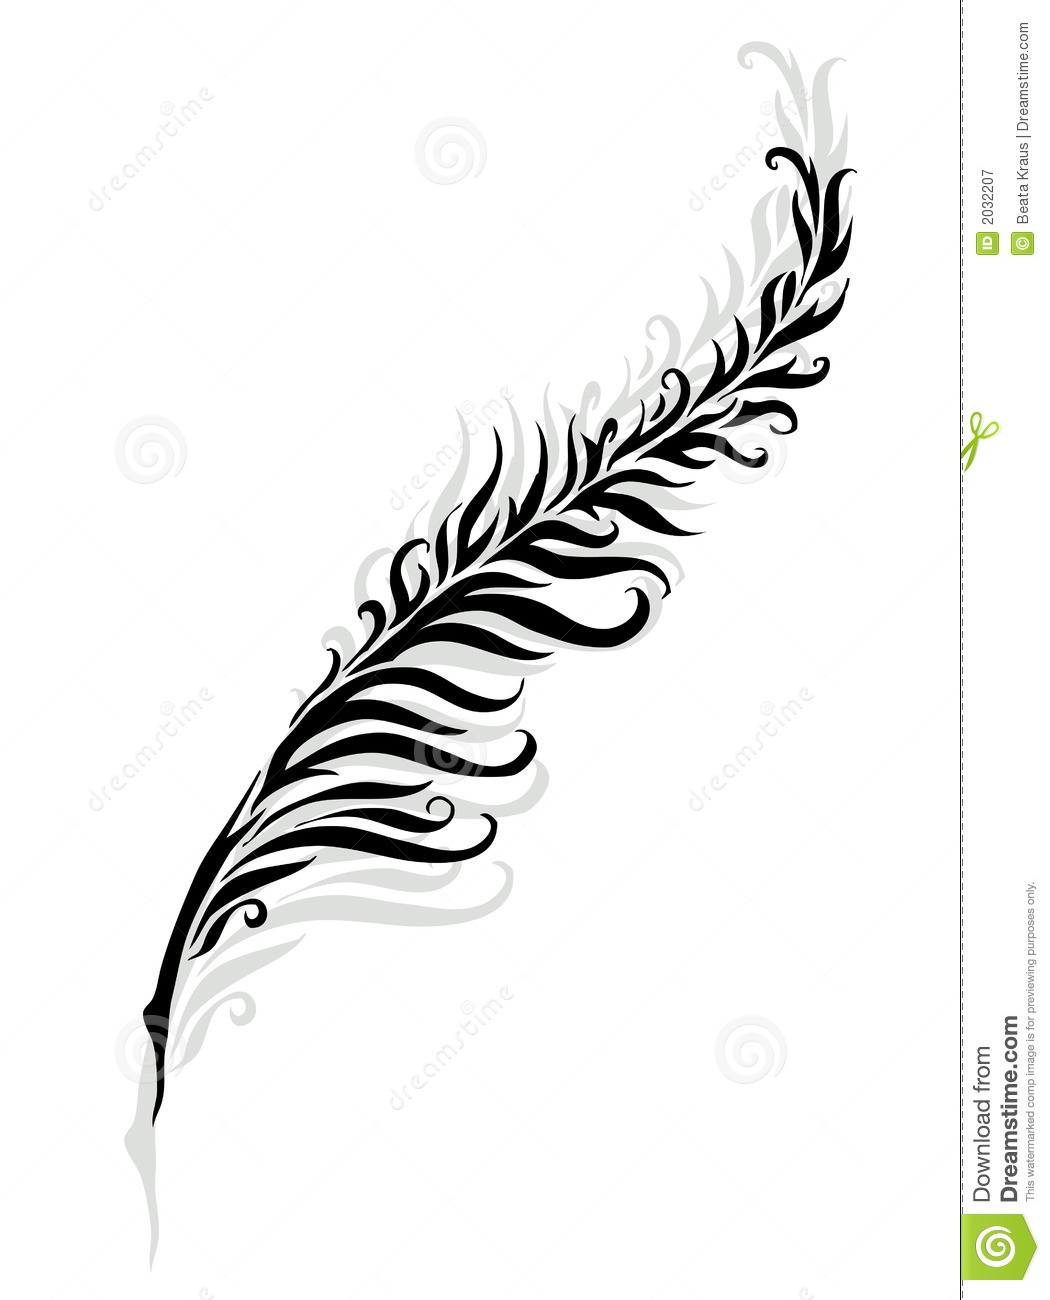 Feather Silhouette Royalty Free Stock Photography   Image  2032207